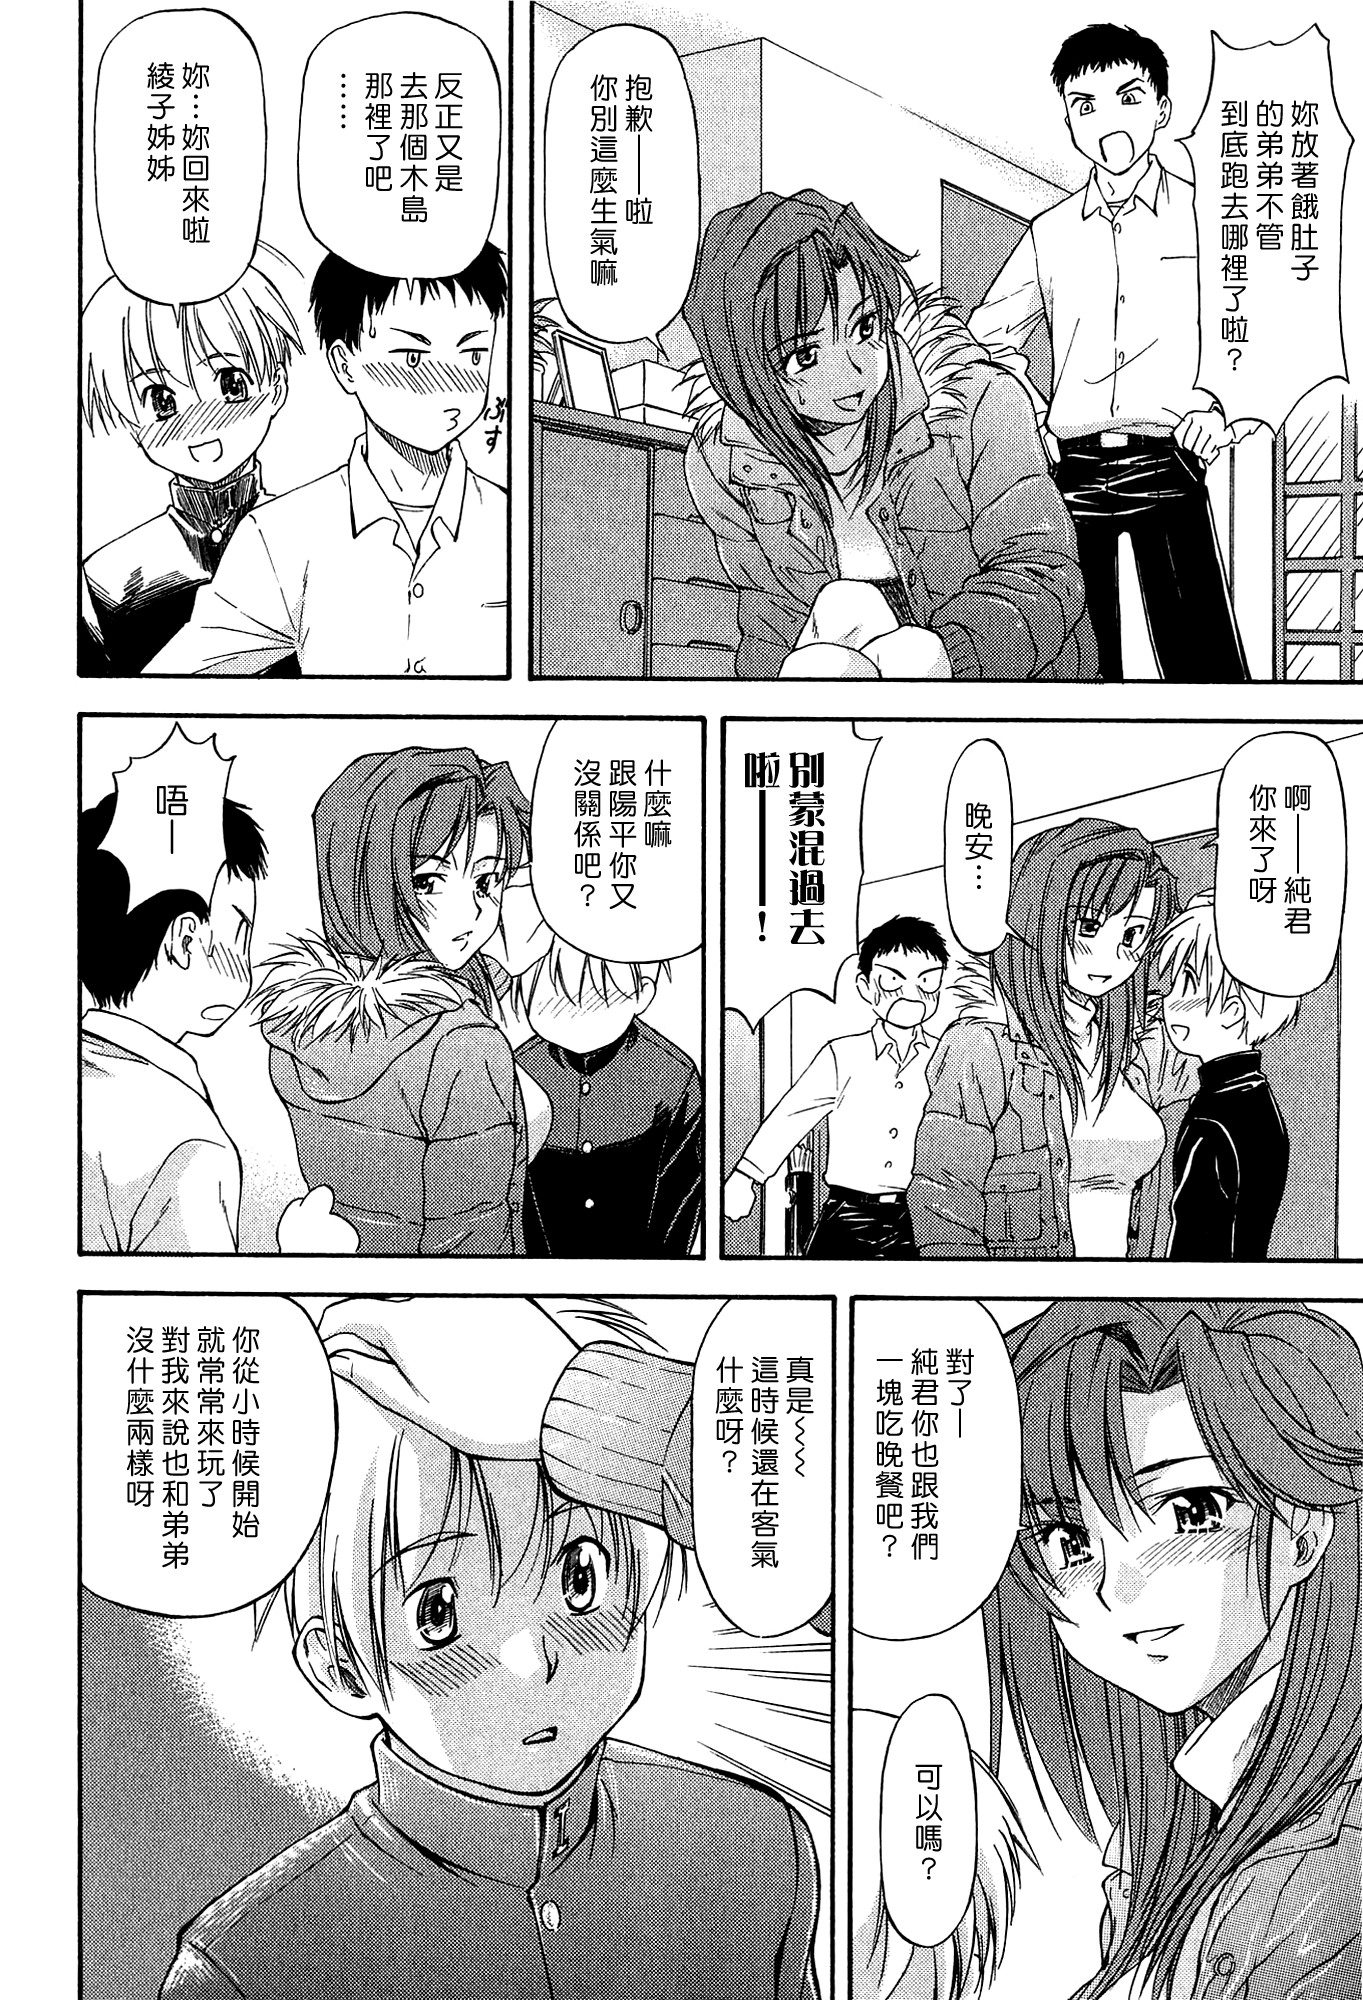 [Nagare Ippon] Ane+Otouto² (Turning Point) [Chinese] [漢化組漢化組] page 6 full